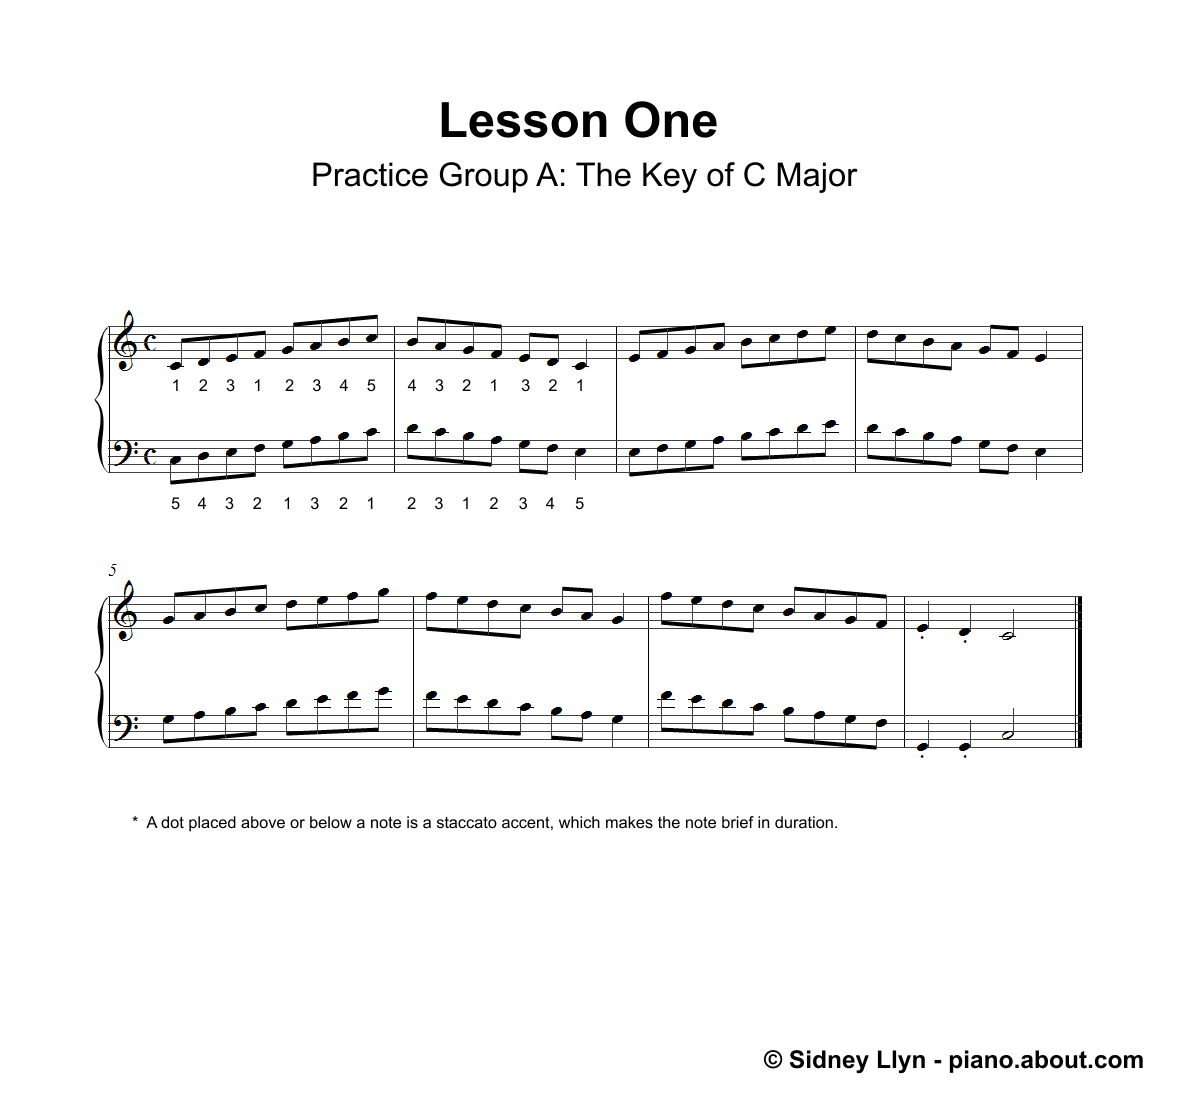 Beginner Piano Lesson Book - Piano Sheet Music For Beginners Popular Songs Free Printable